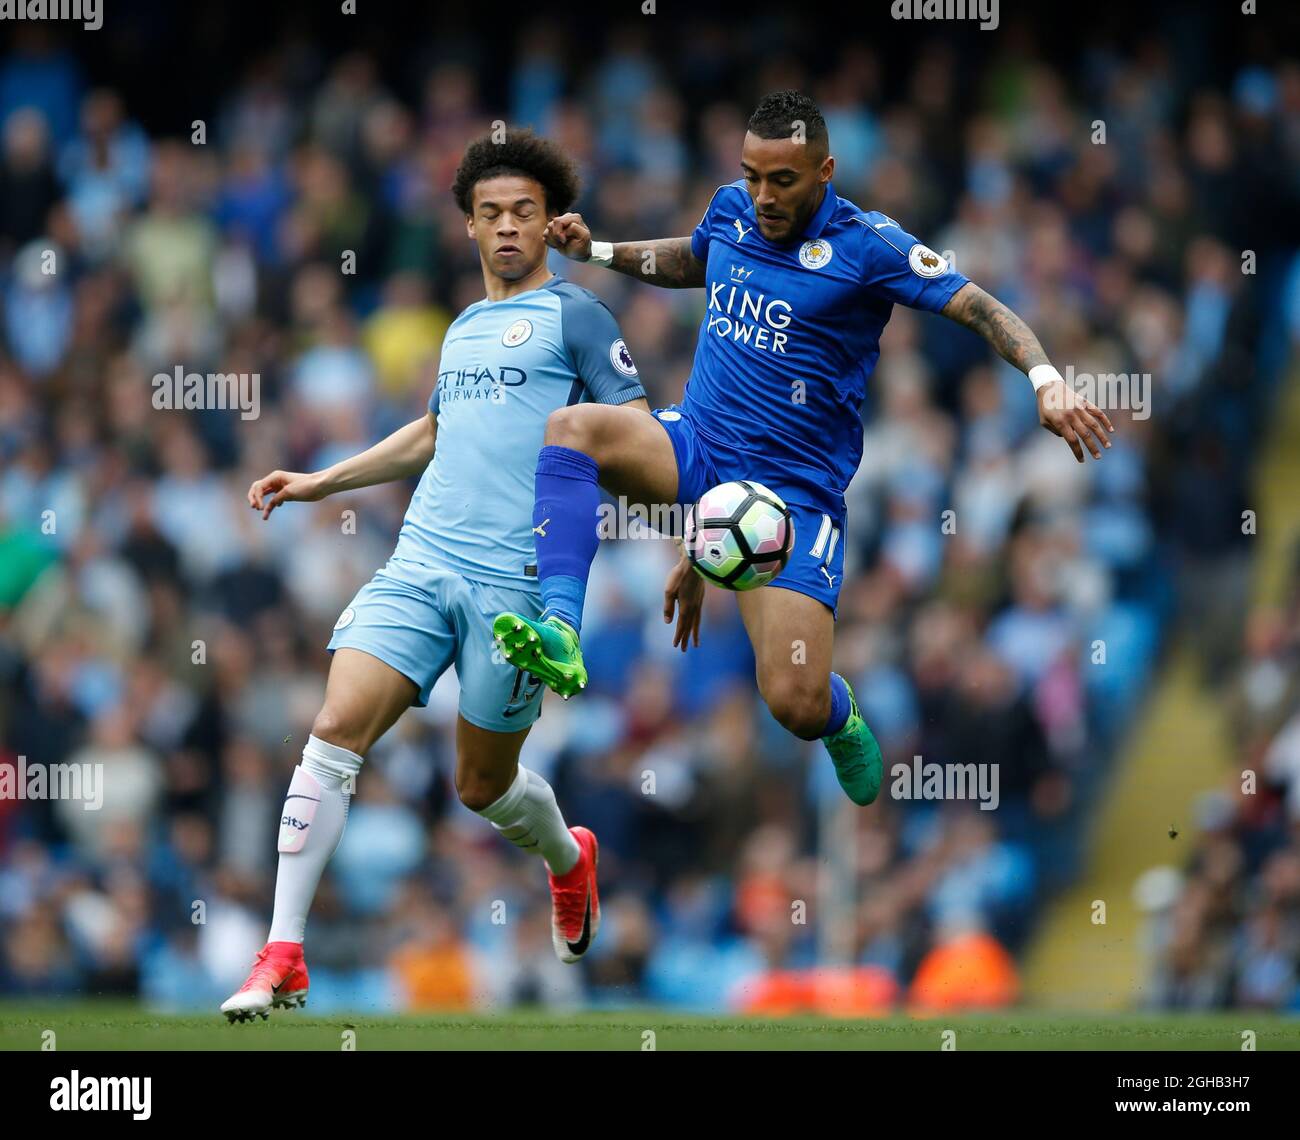 Leroy Sane of Manchester City in action with Danny Simpson of Leicester City during the English Premier League match at the Etihad Stadium, Manchester. Picture date: May 13th 2017. Pic credit should read: Simon Bellis/Sportimage via PA Images Stock Photo